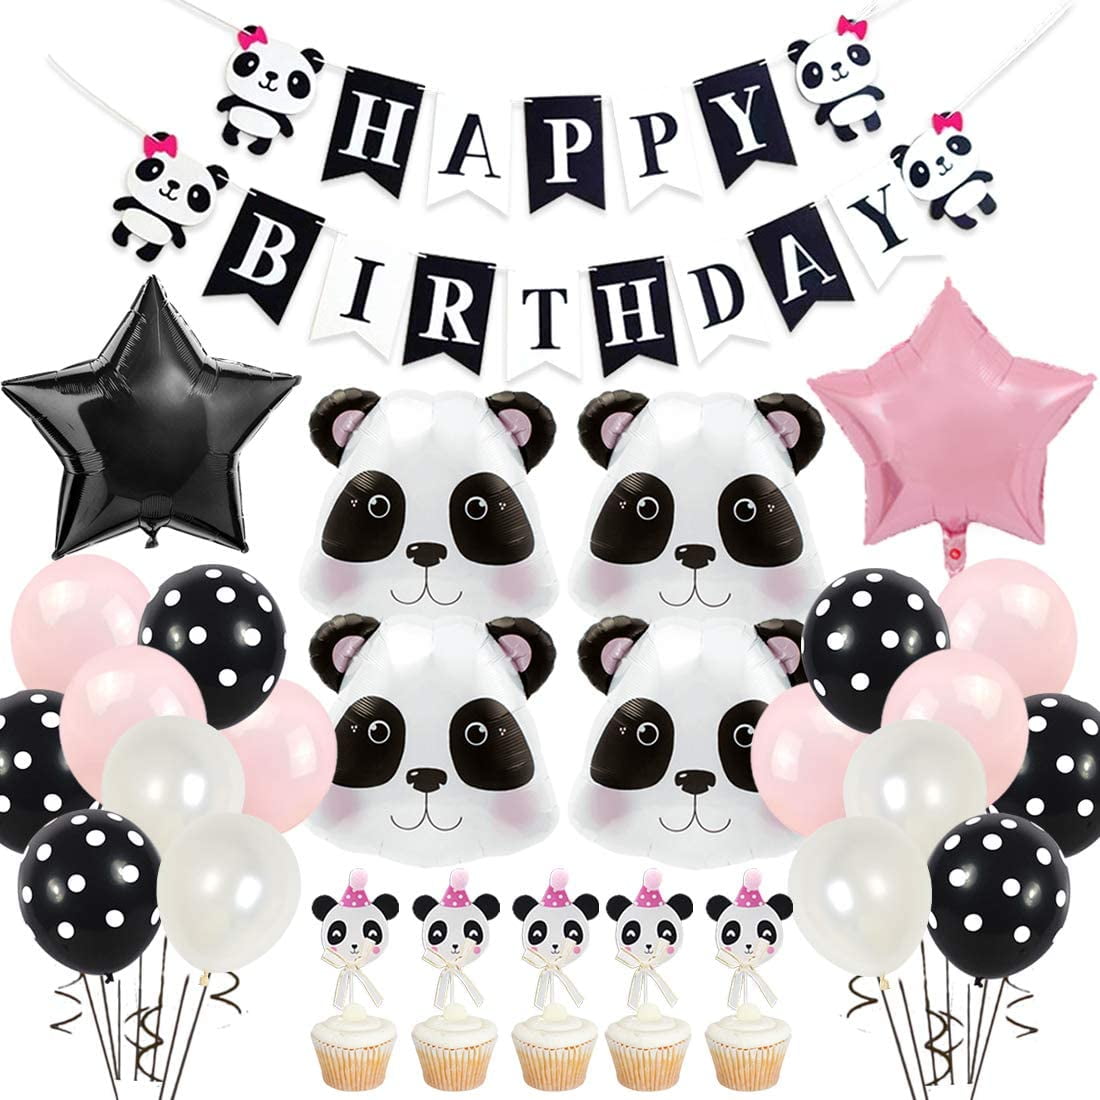 Gift Bags Panda Cupcake Toppers for Children Birthday Party Kids Nursery Bedroom Décor Panda Bear Themes Happy Birthday Banner Panda Bamboo Balloons 61 Pcs Panda Birthday Party Decorations Supplies